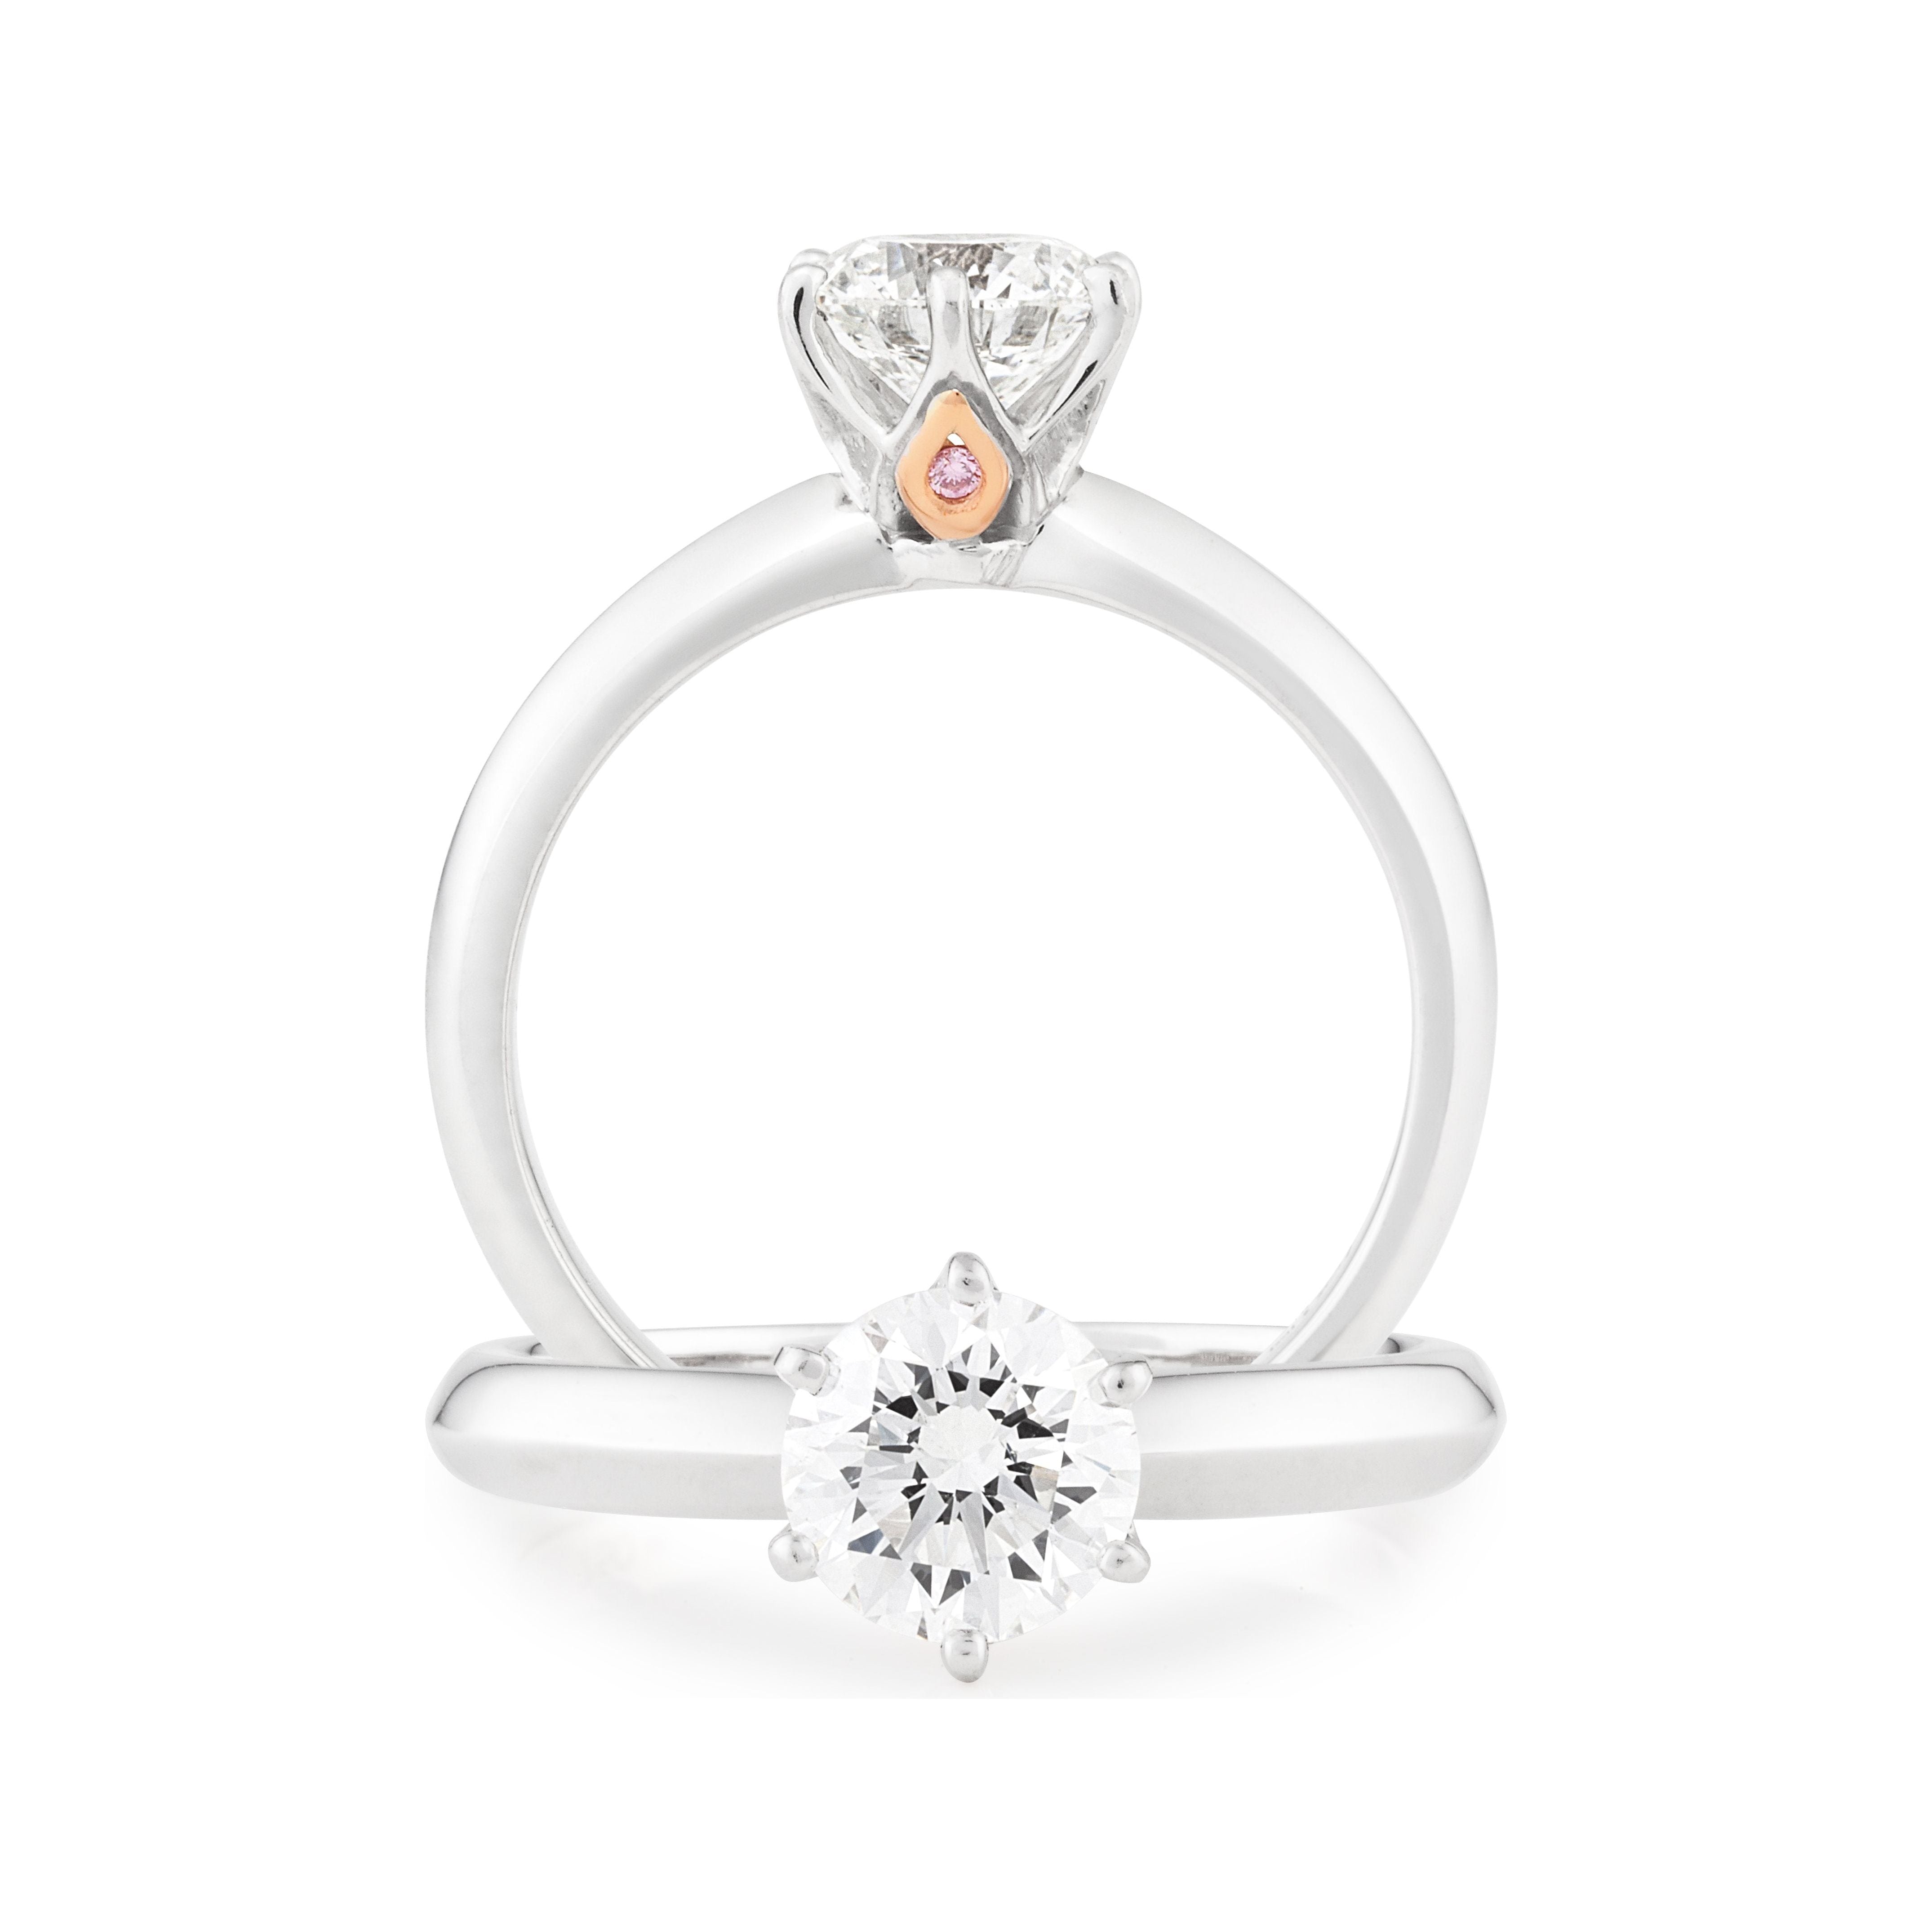 PINK CAVIAR 0.50ct White Round Brilliant Cut & Pink Diamond Engagement Ring in 18ct White Gold